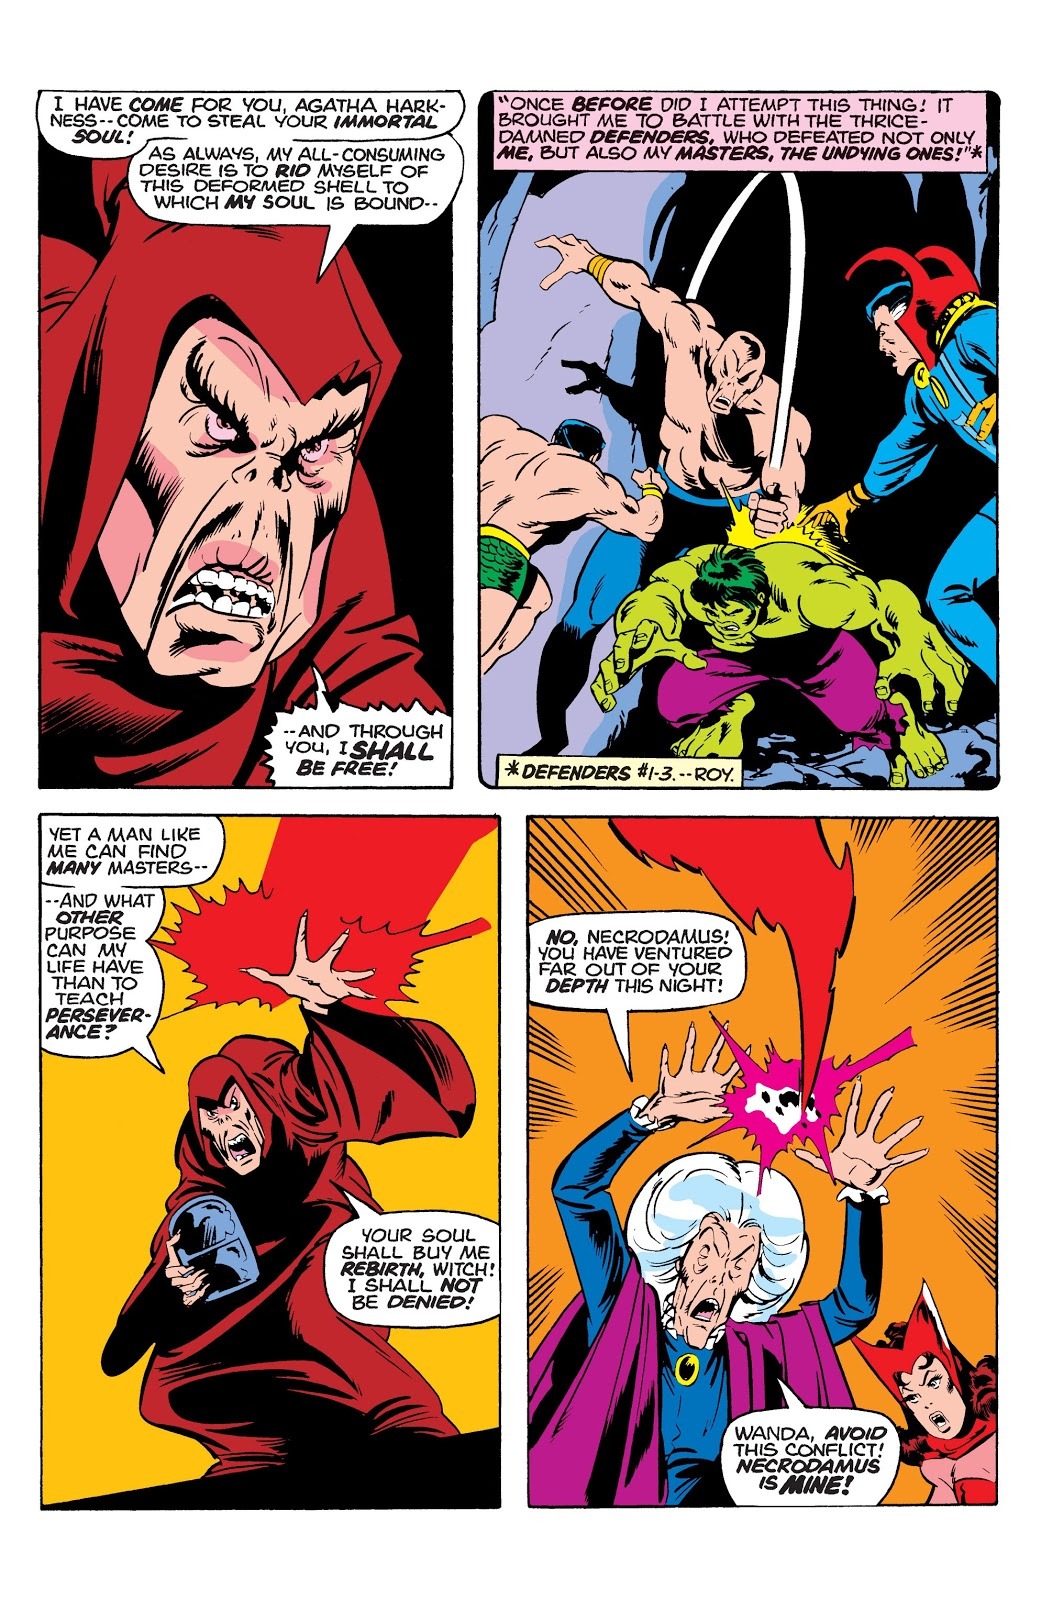 My Midlife Crisis — The Avengers #128: Agatha Harkness meets the